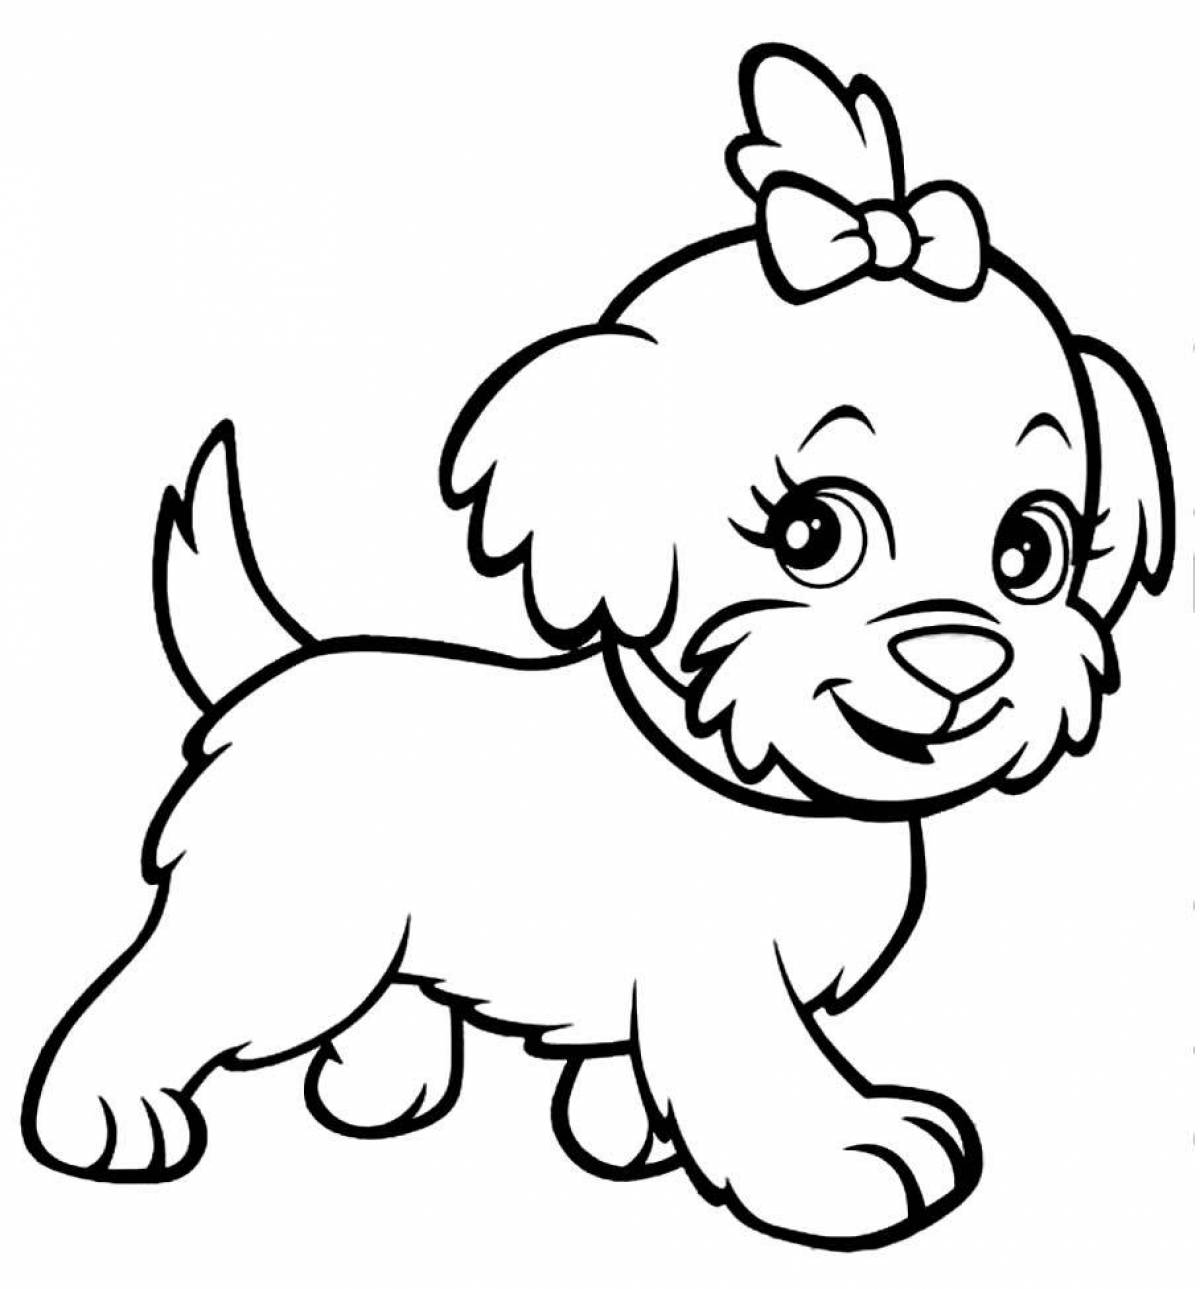 Coloring pages of dogs and kittens for children